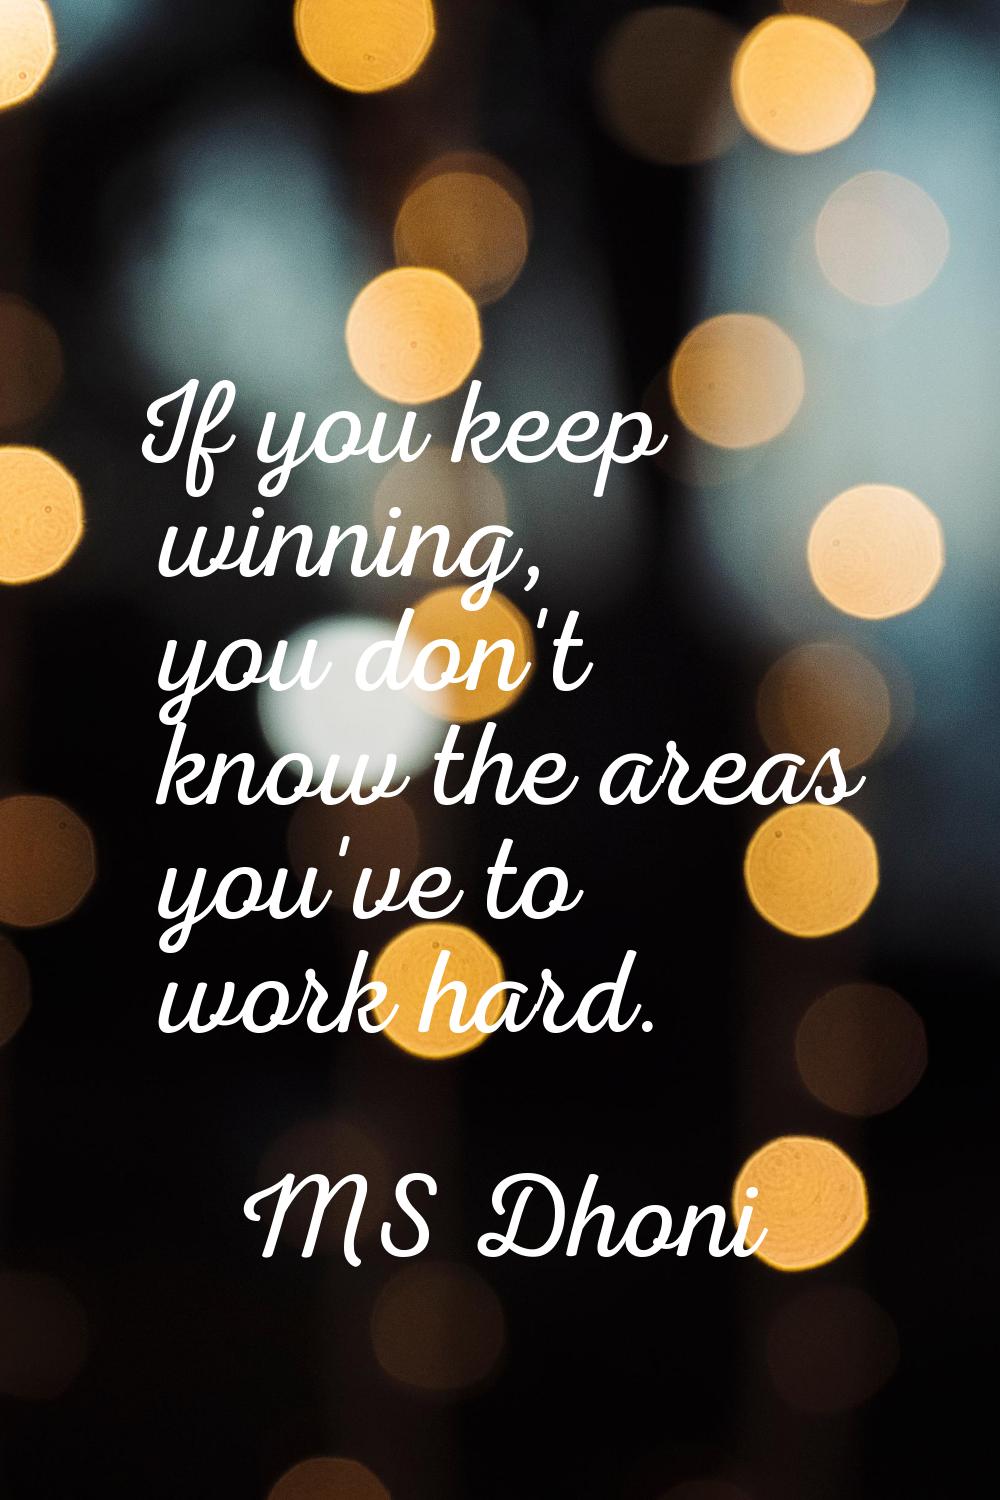 If you keep winning, you don't know the areas you've to work hard.